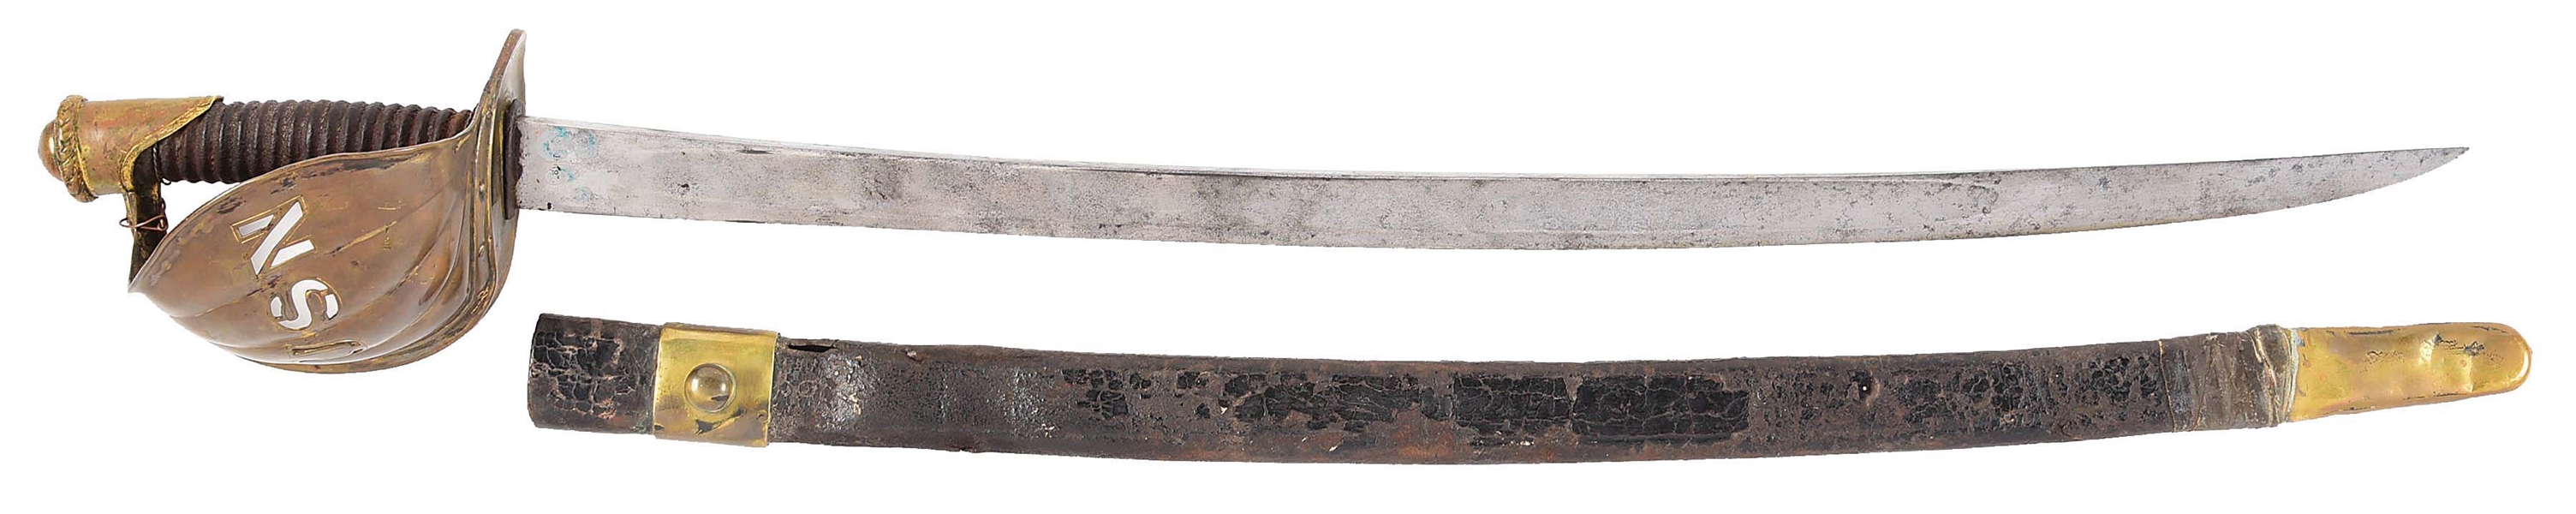 SCARCE US MODEL 1860 NAVAL OFFICERS CUTLASS WITH SCABBARD.